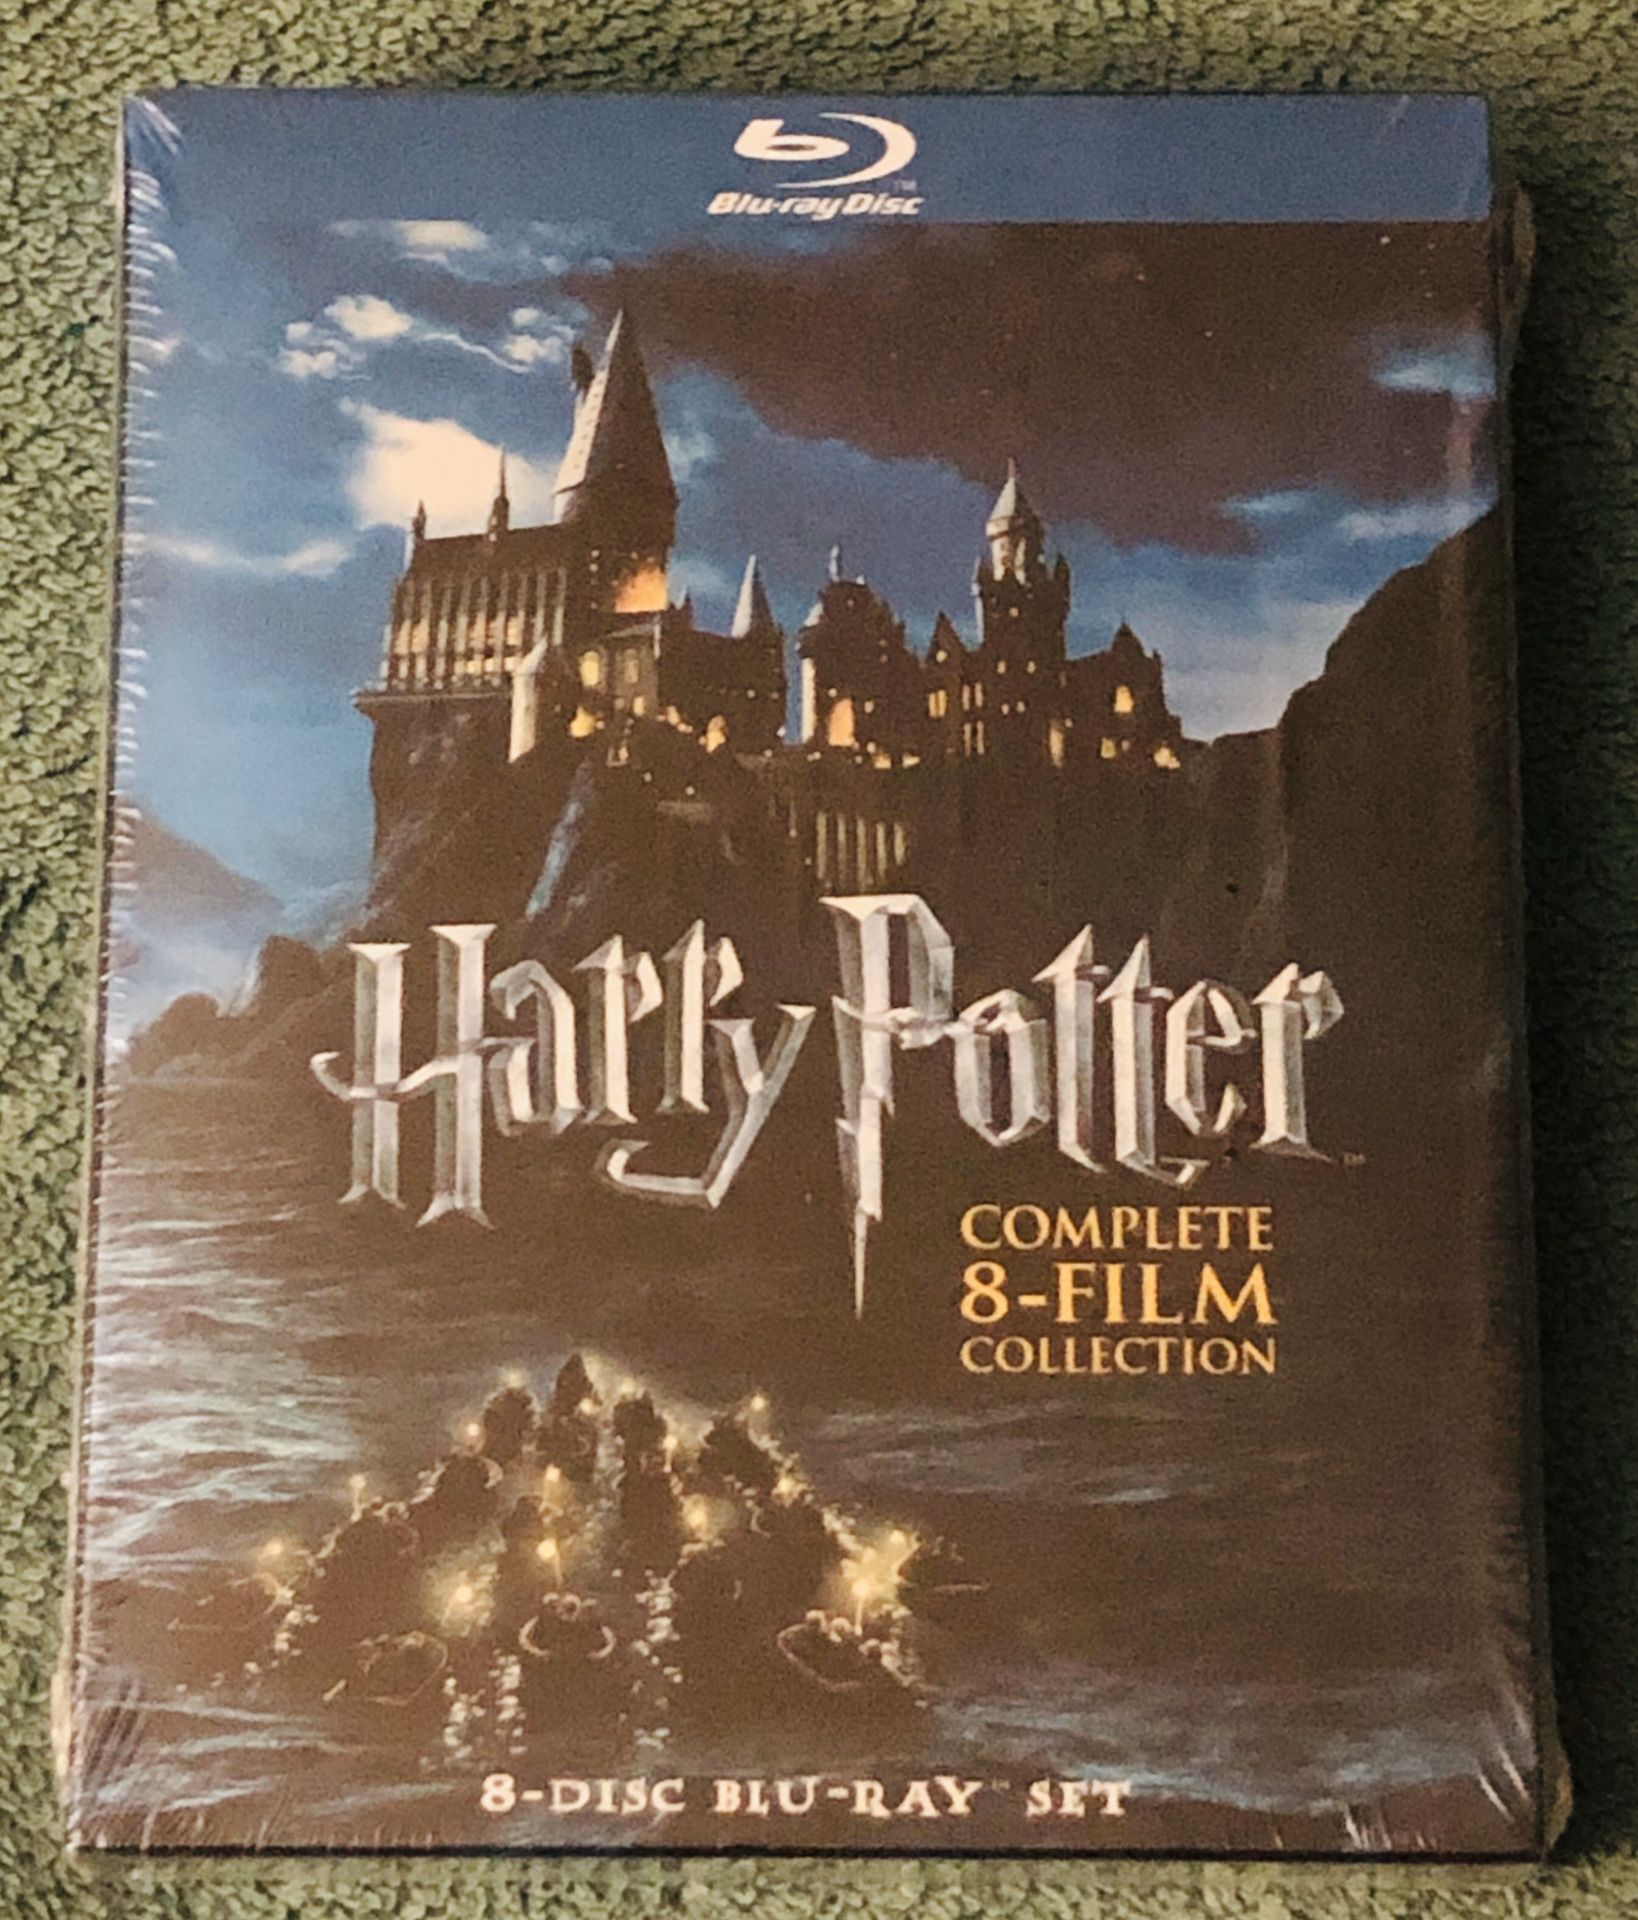 HARRY POTTER COMPLETE 8-FILM COLLECTION BLU-RAY SEALED